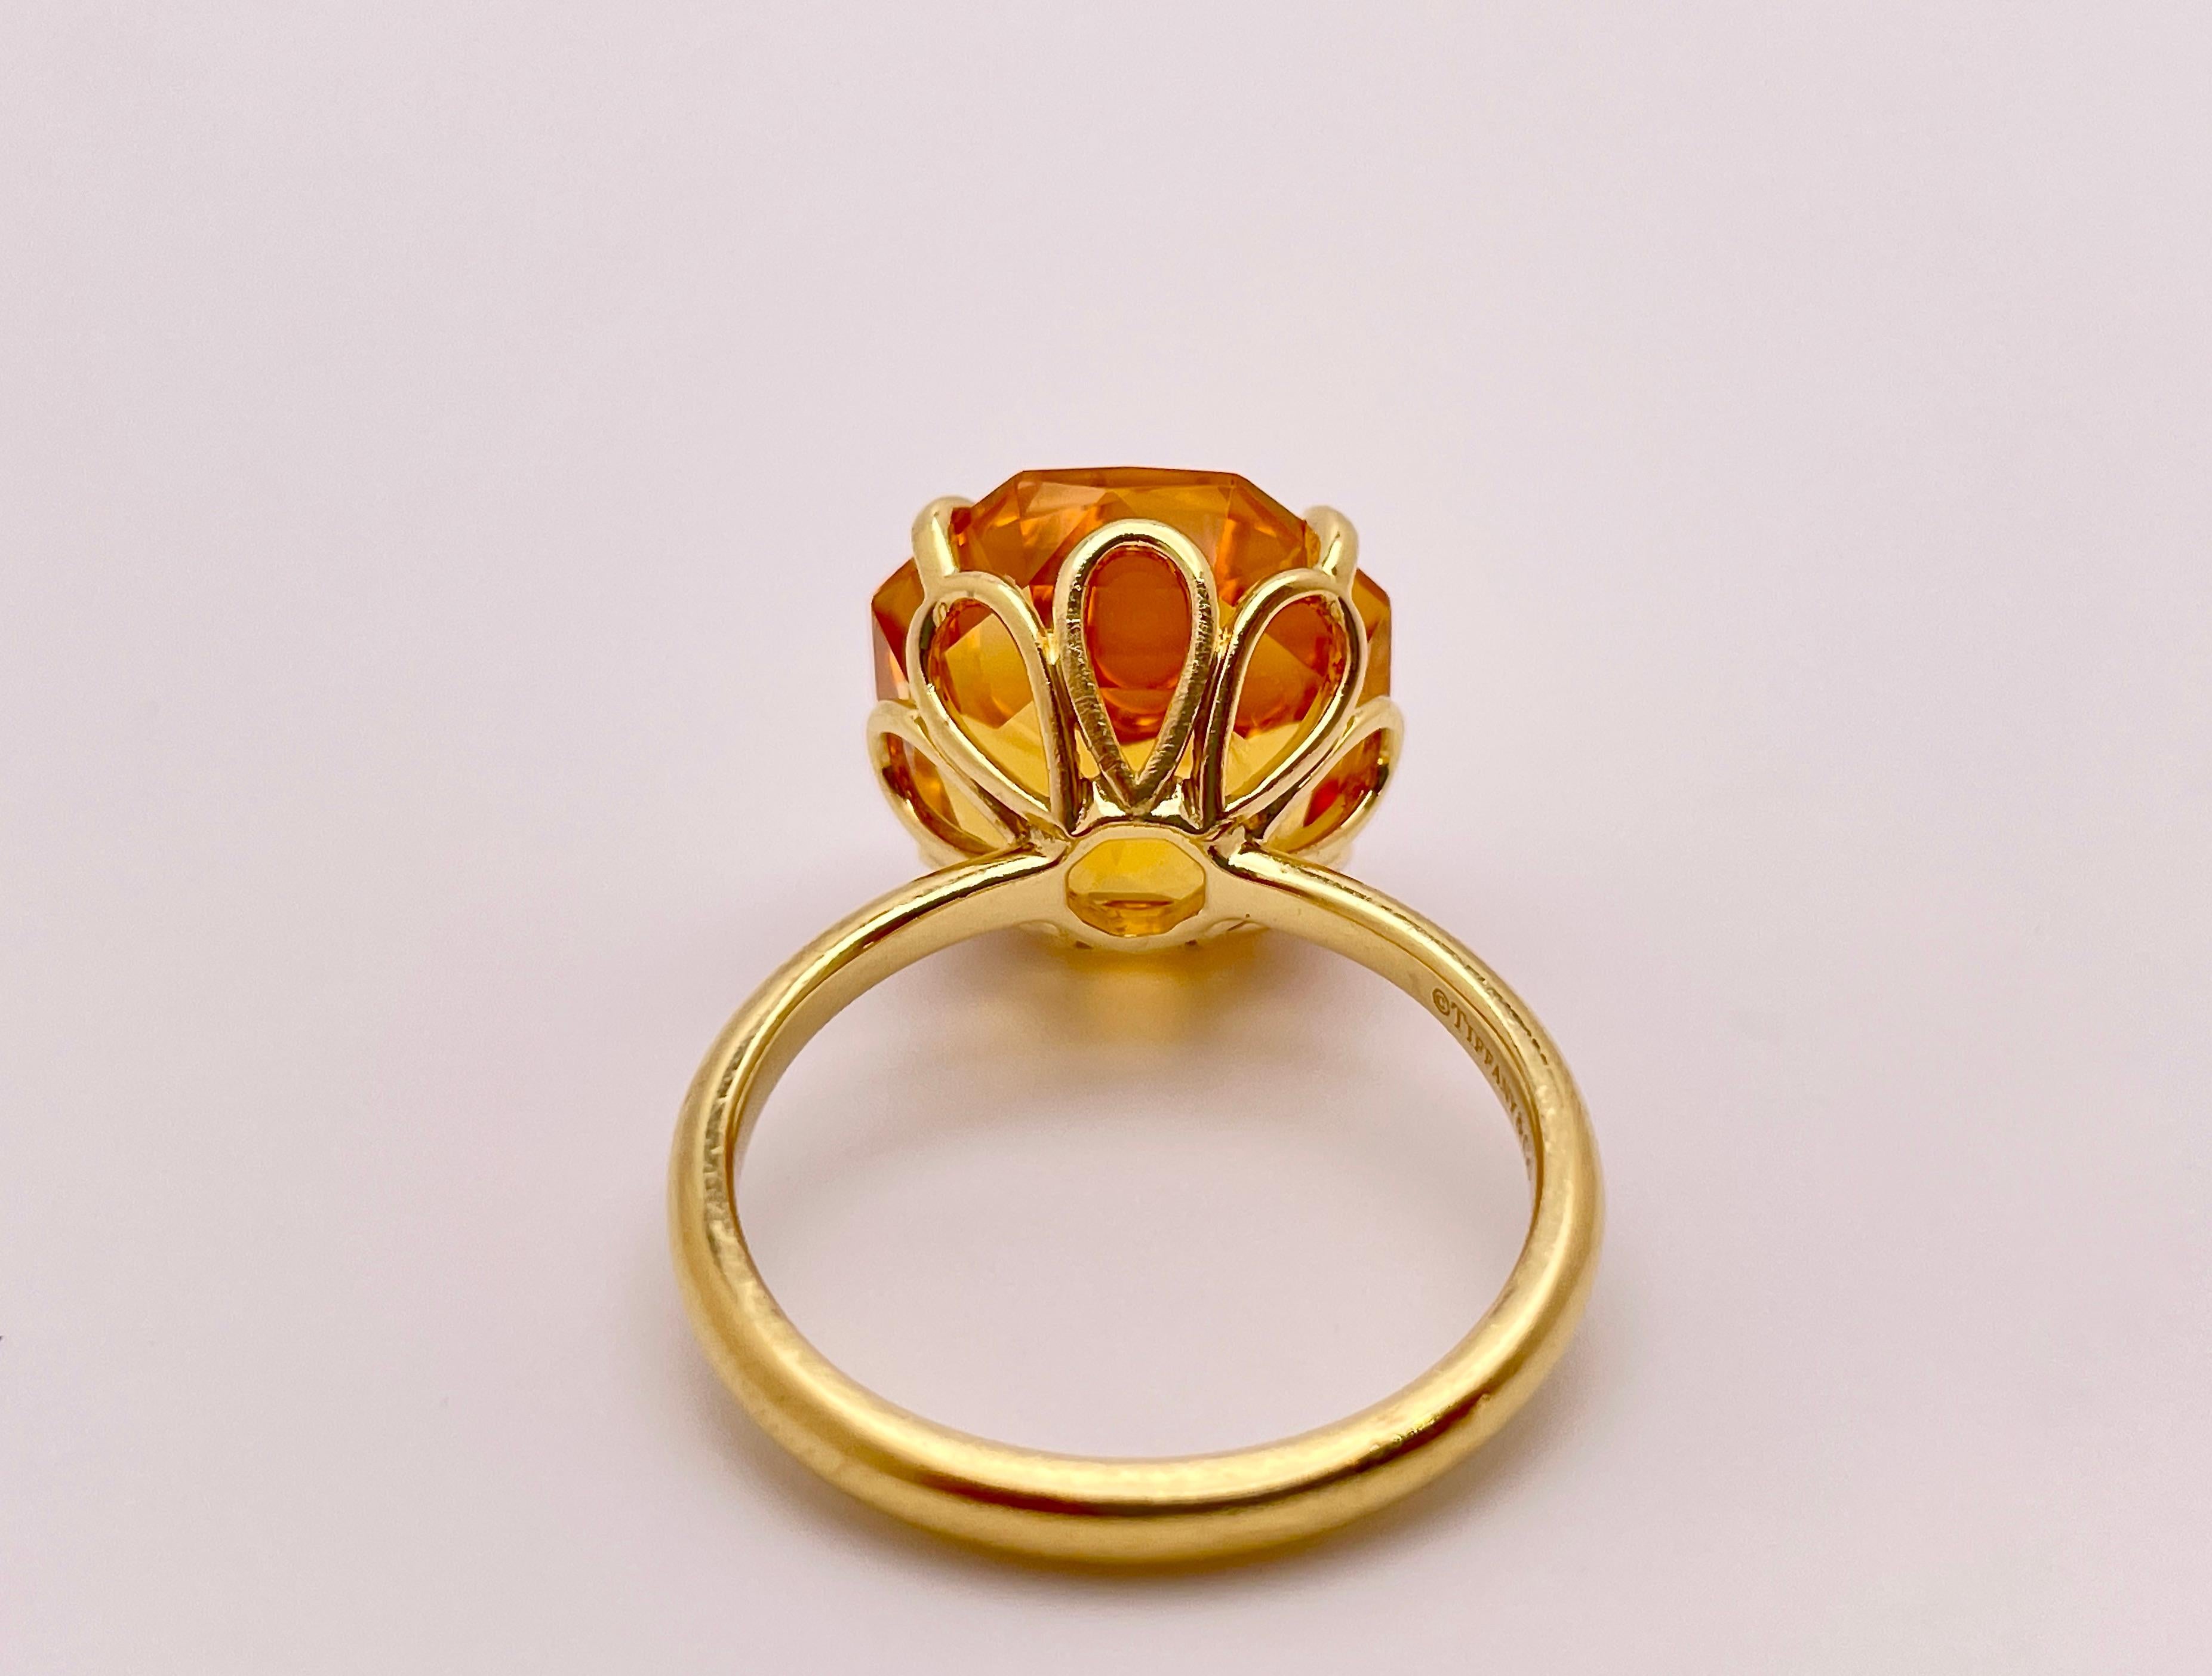 10 Carat Tiffany and Co. Elsa Peretti Citrine 18K Yellow Gold Engagement Ring For Sale 3